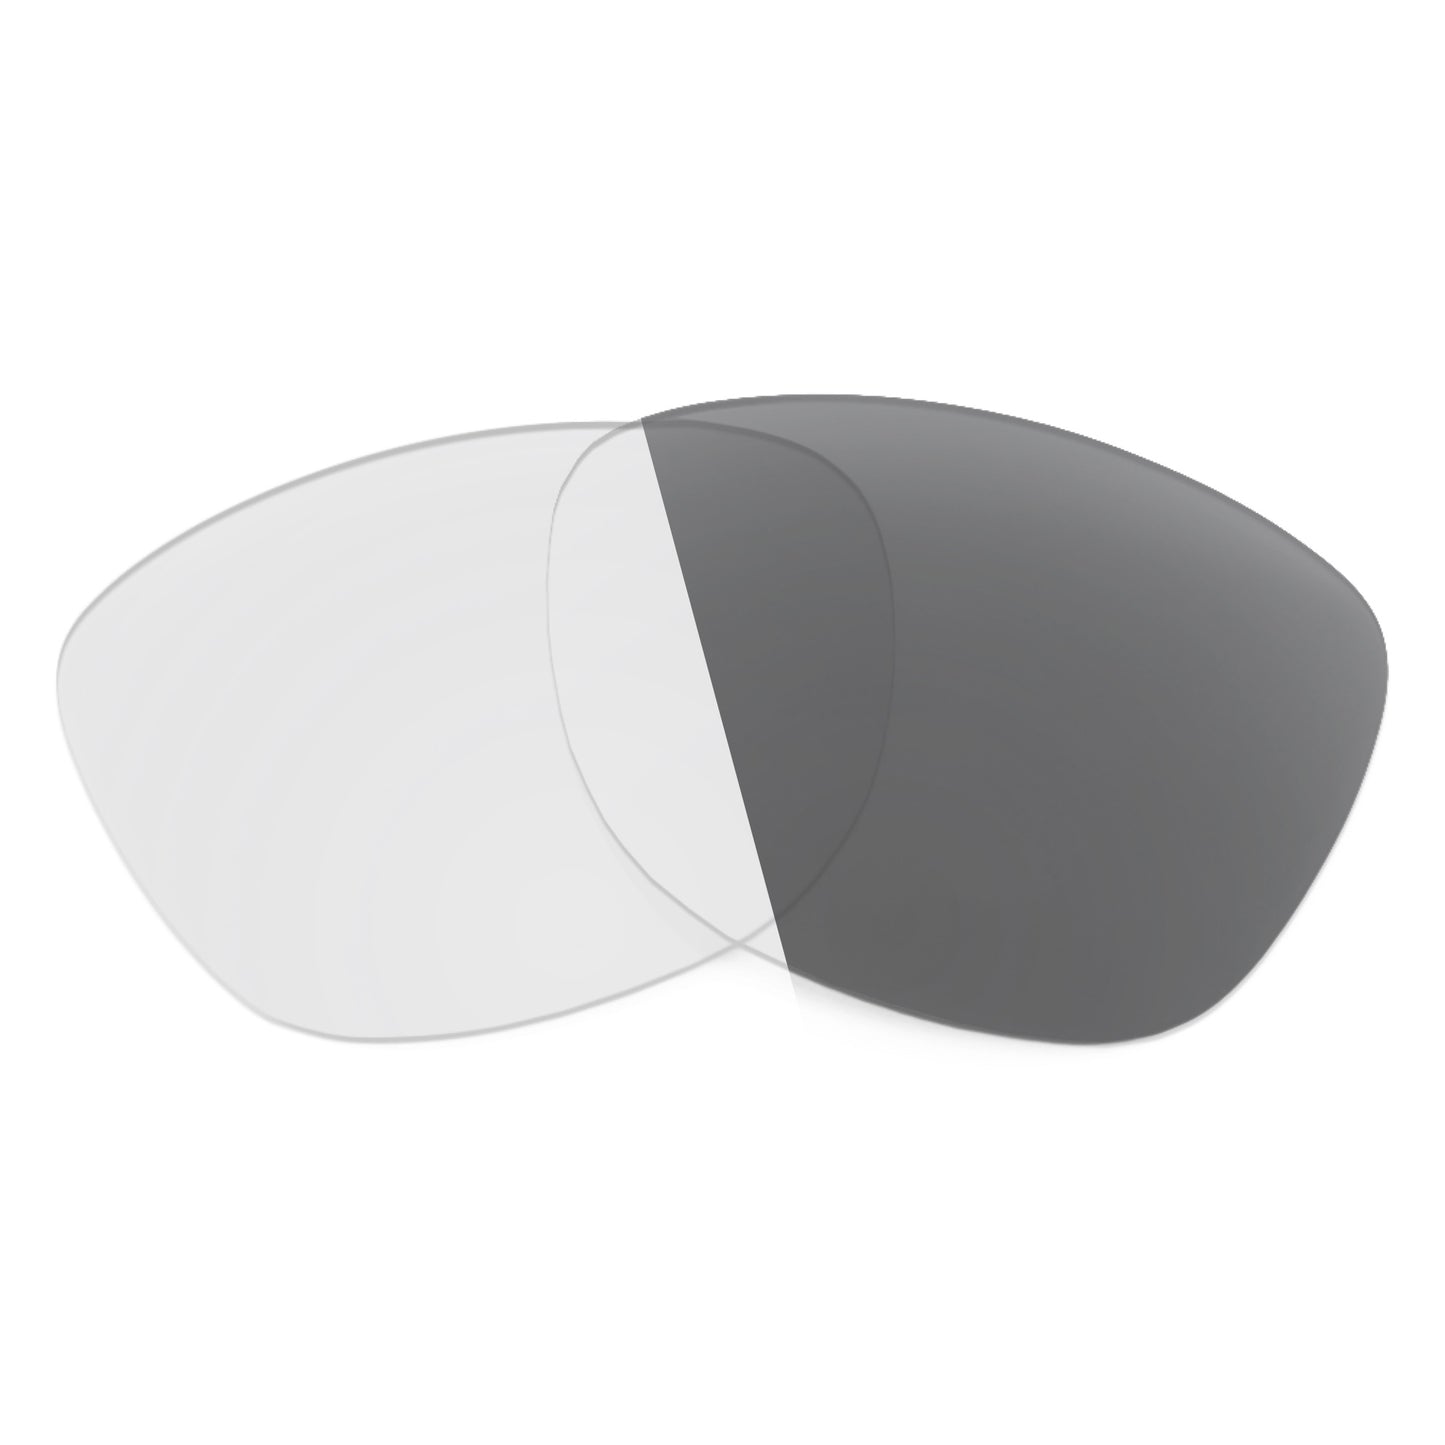 Revant replacement lenses for Ray-Ban Elliot RB2197 52mm Non-Polarized Adapt Gray Photochromic